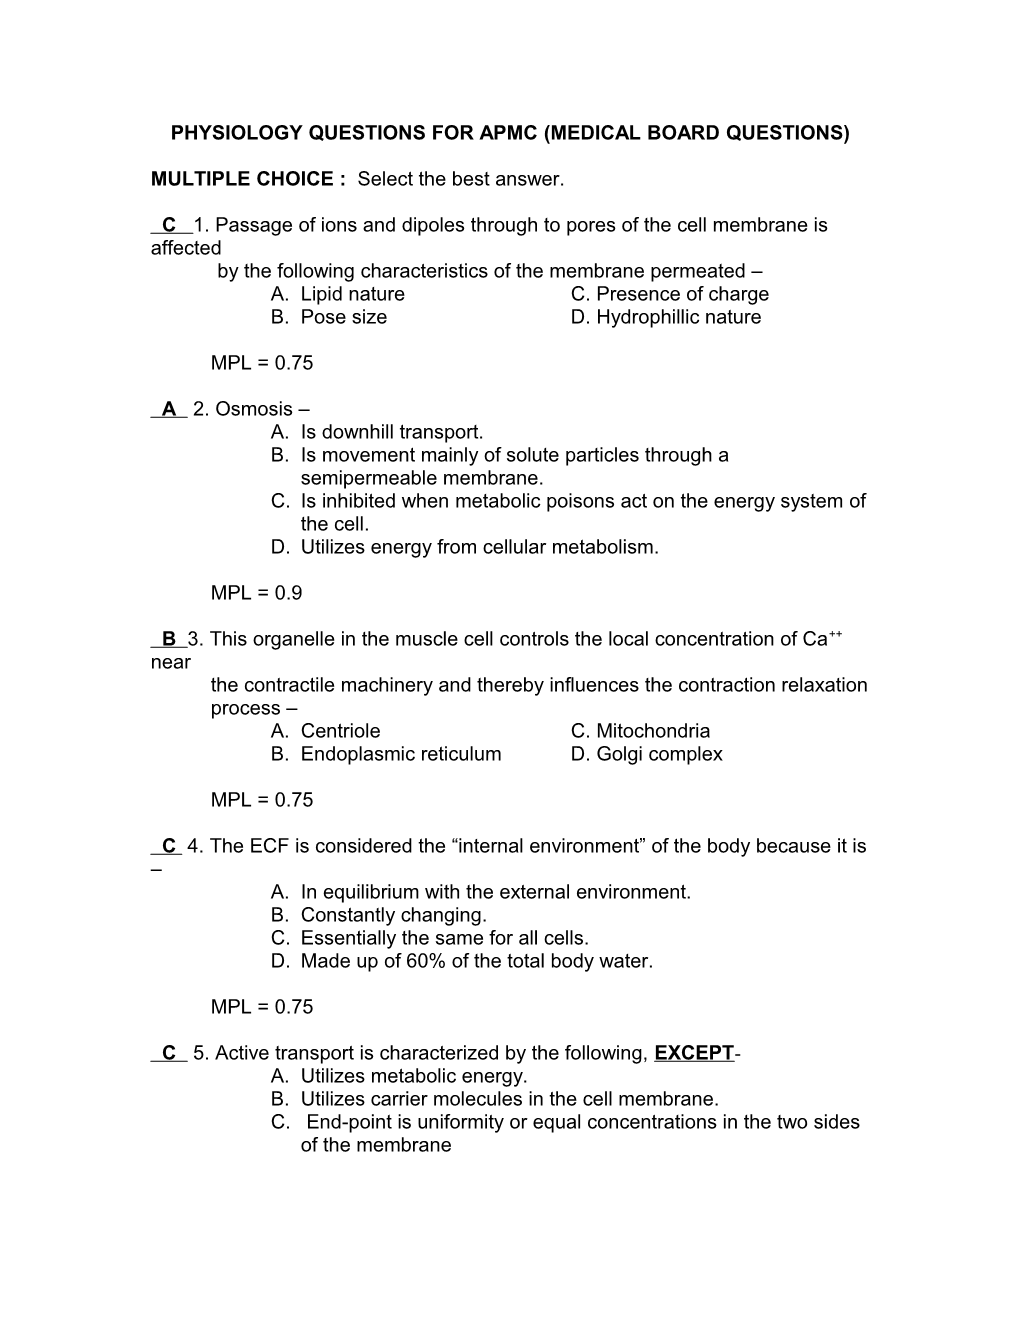 Physiology Questions for Apmc (Medical Board Questions)